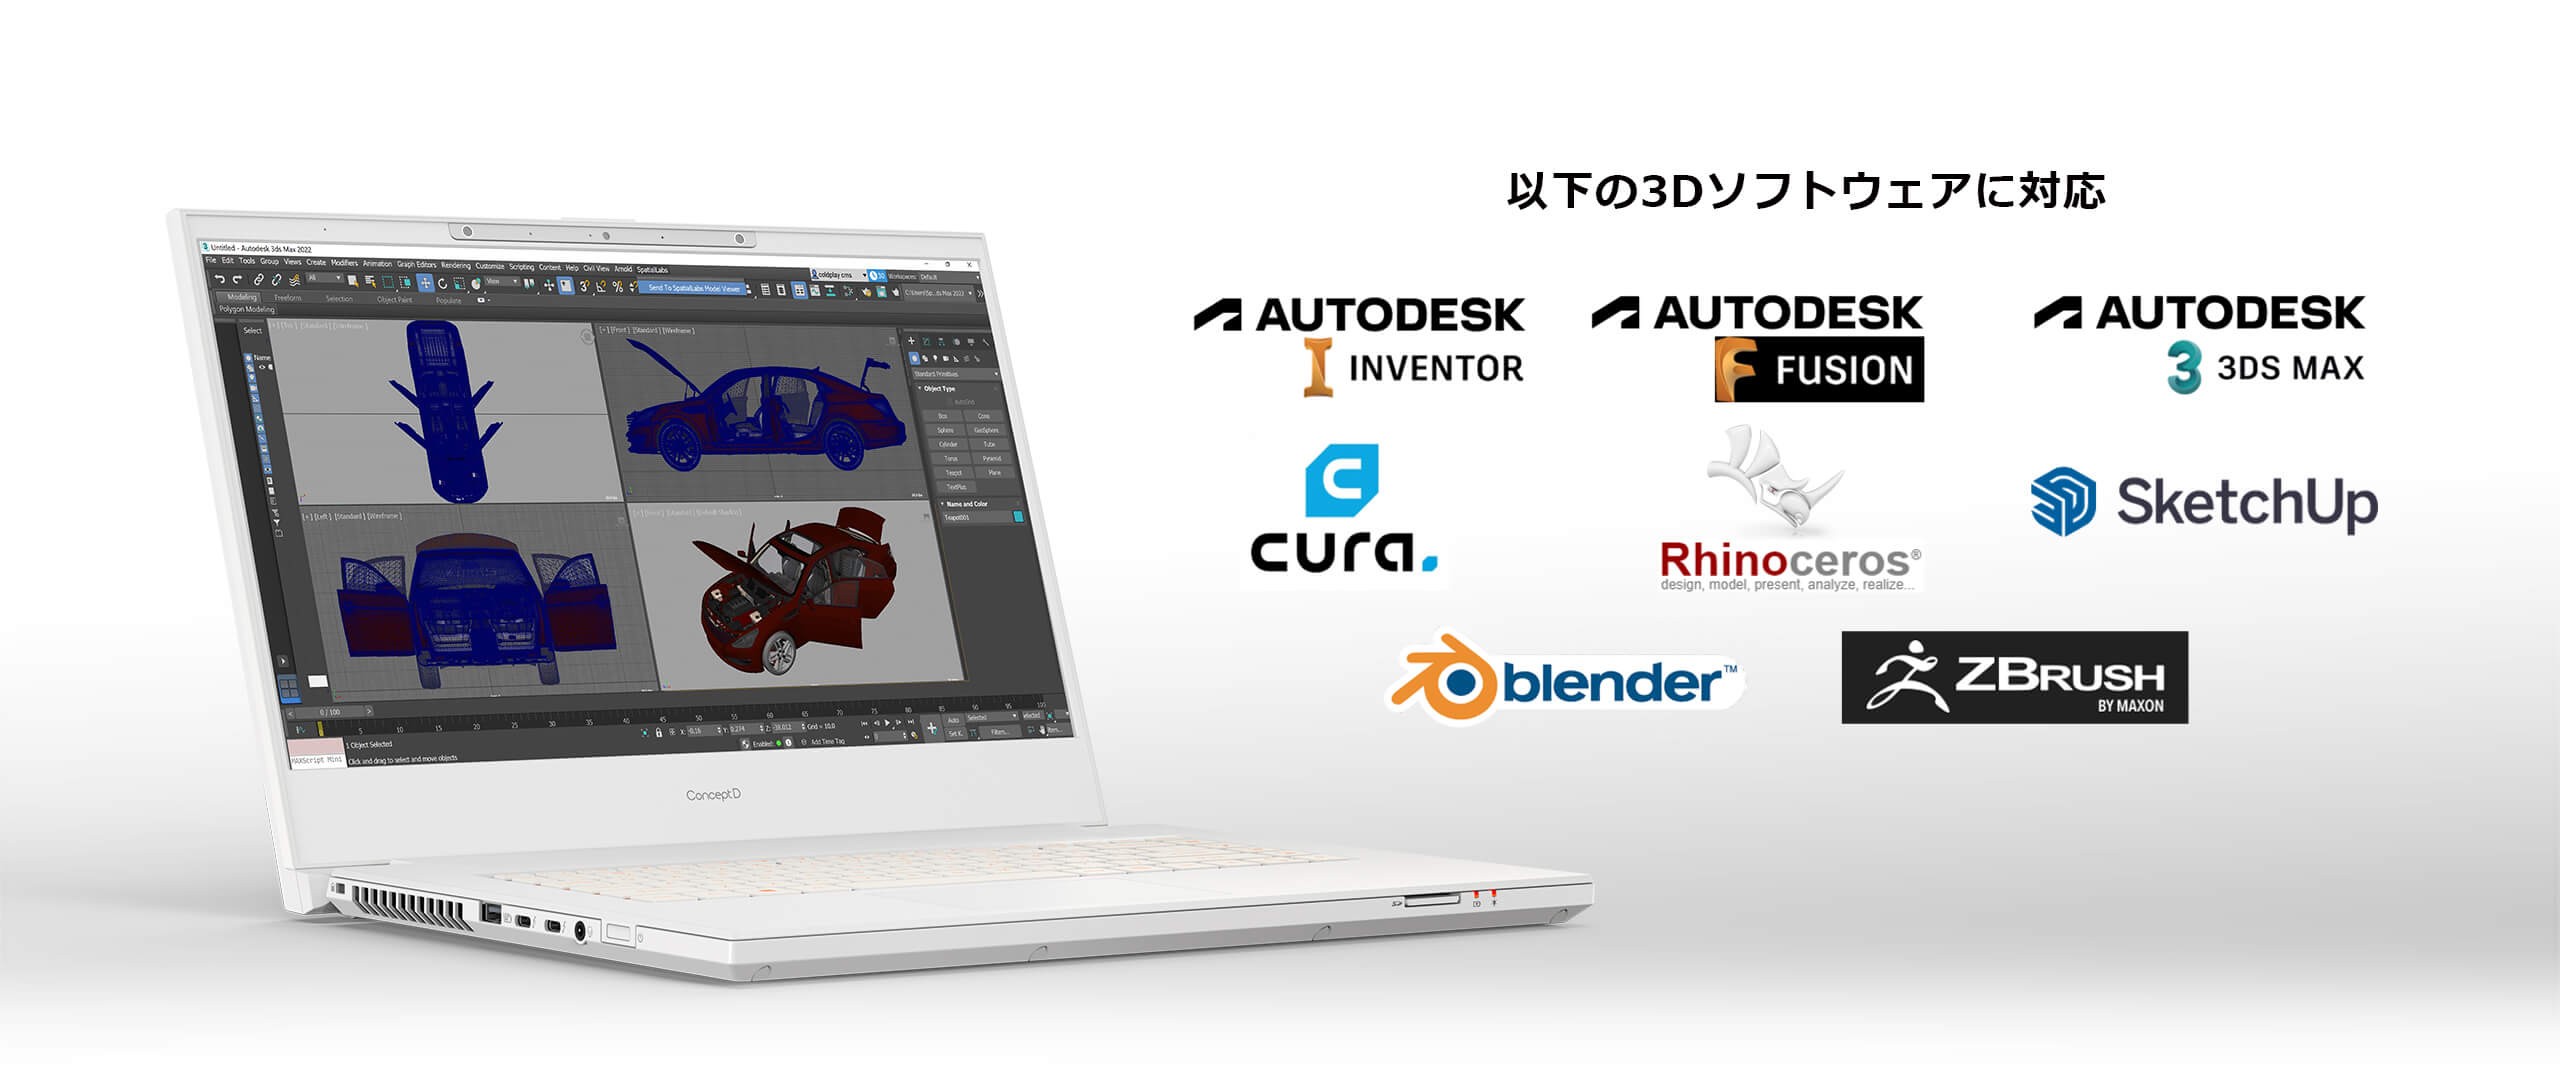 Autodesk Inventor、Autodesk Fusion、Autodesk 3ds Max、Cura、Rhinoceros、SketchUp、Blender、ZBrush の3Dソフトウェアに対応、